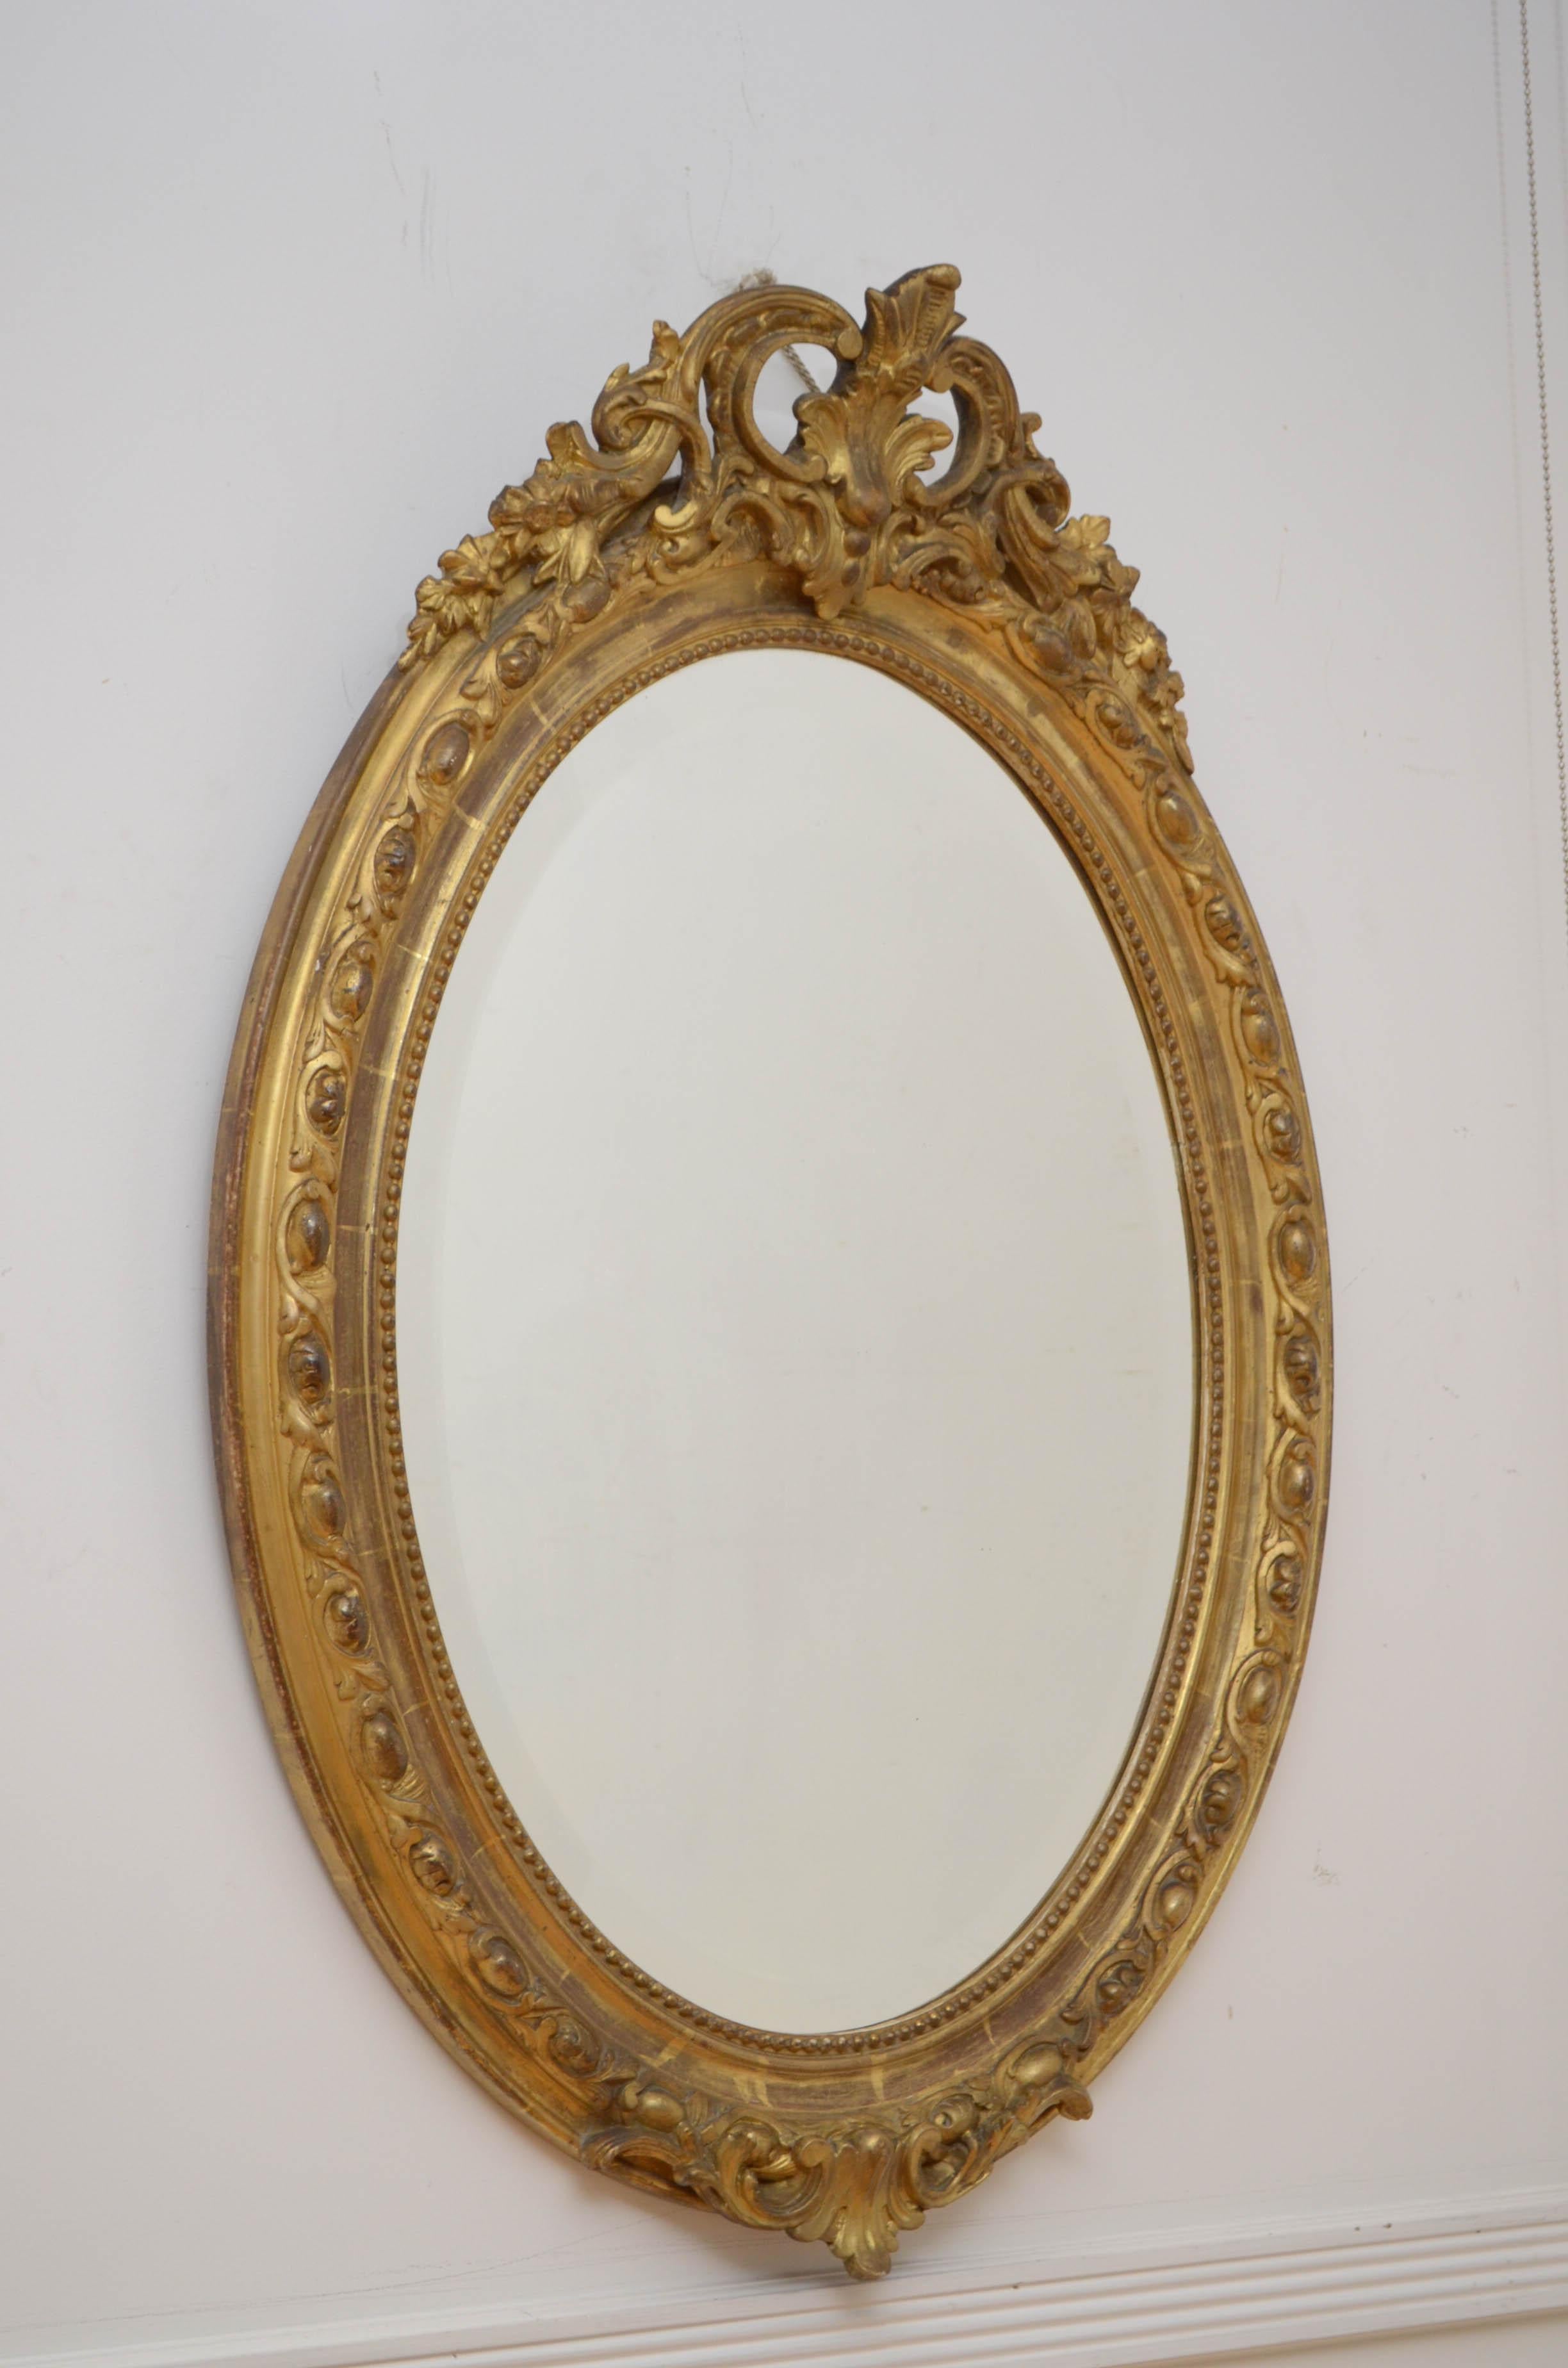 Fine 19th century hand carved mirror in Rococo style, having original bevelled edge glass with some speckle in finely carved frame. The frame is carved with ‘les pearls’ which symbolises strand of pearls and leaf motifs throughout. This mirror has